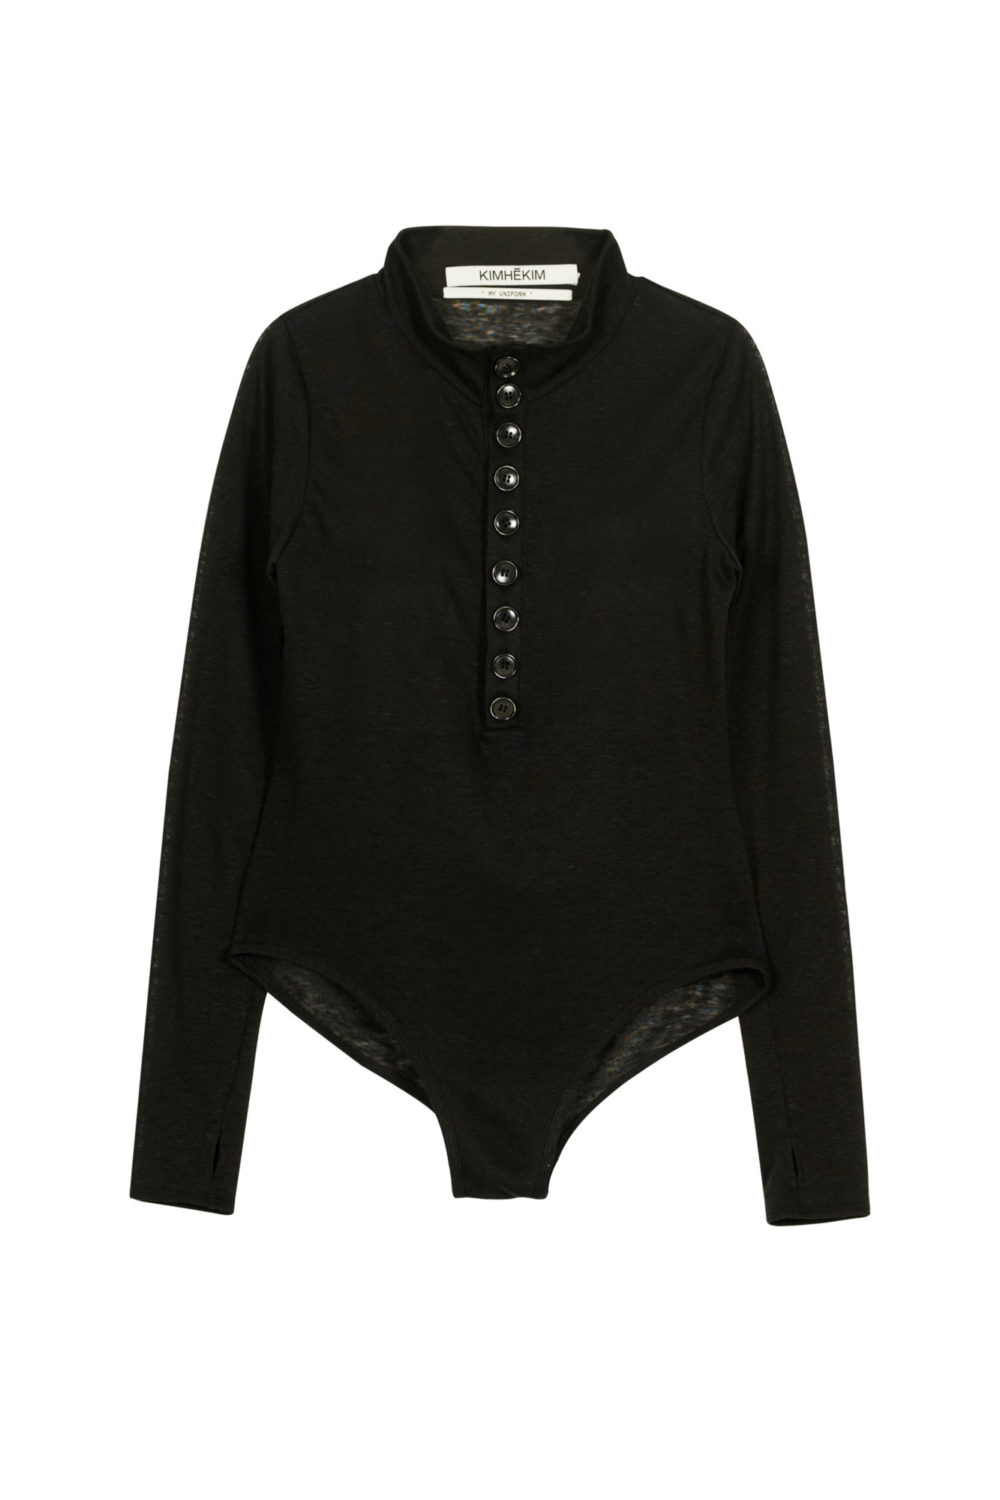 Button Up Jersey Body Suit